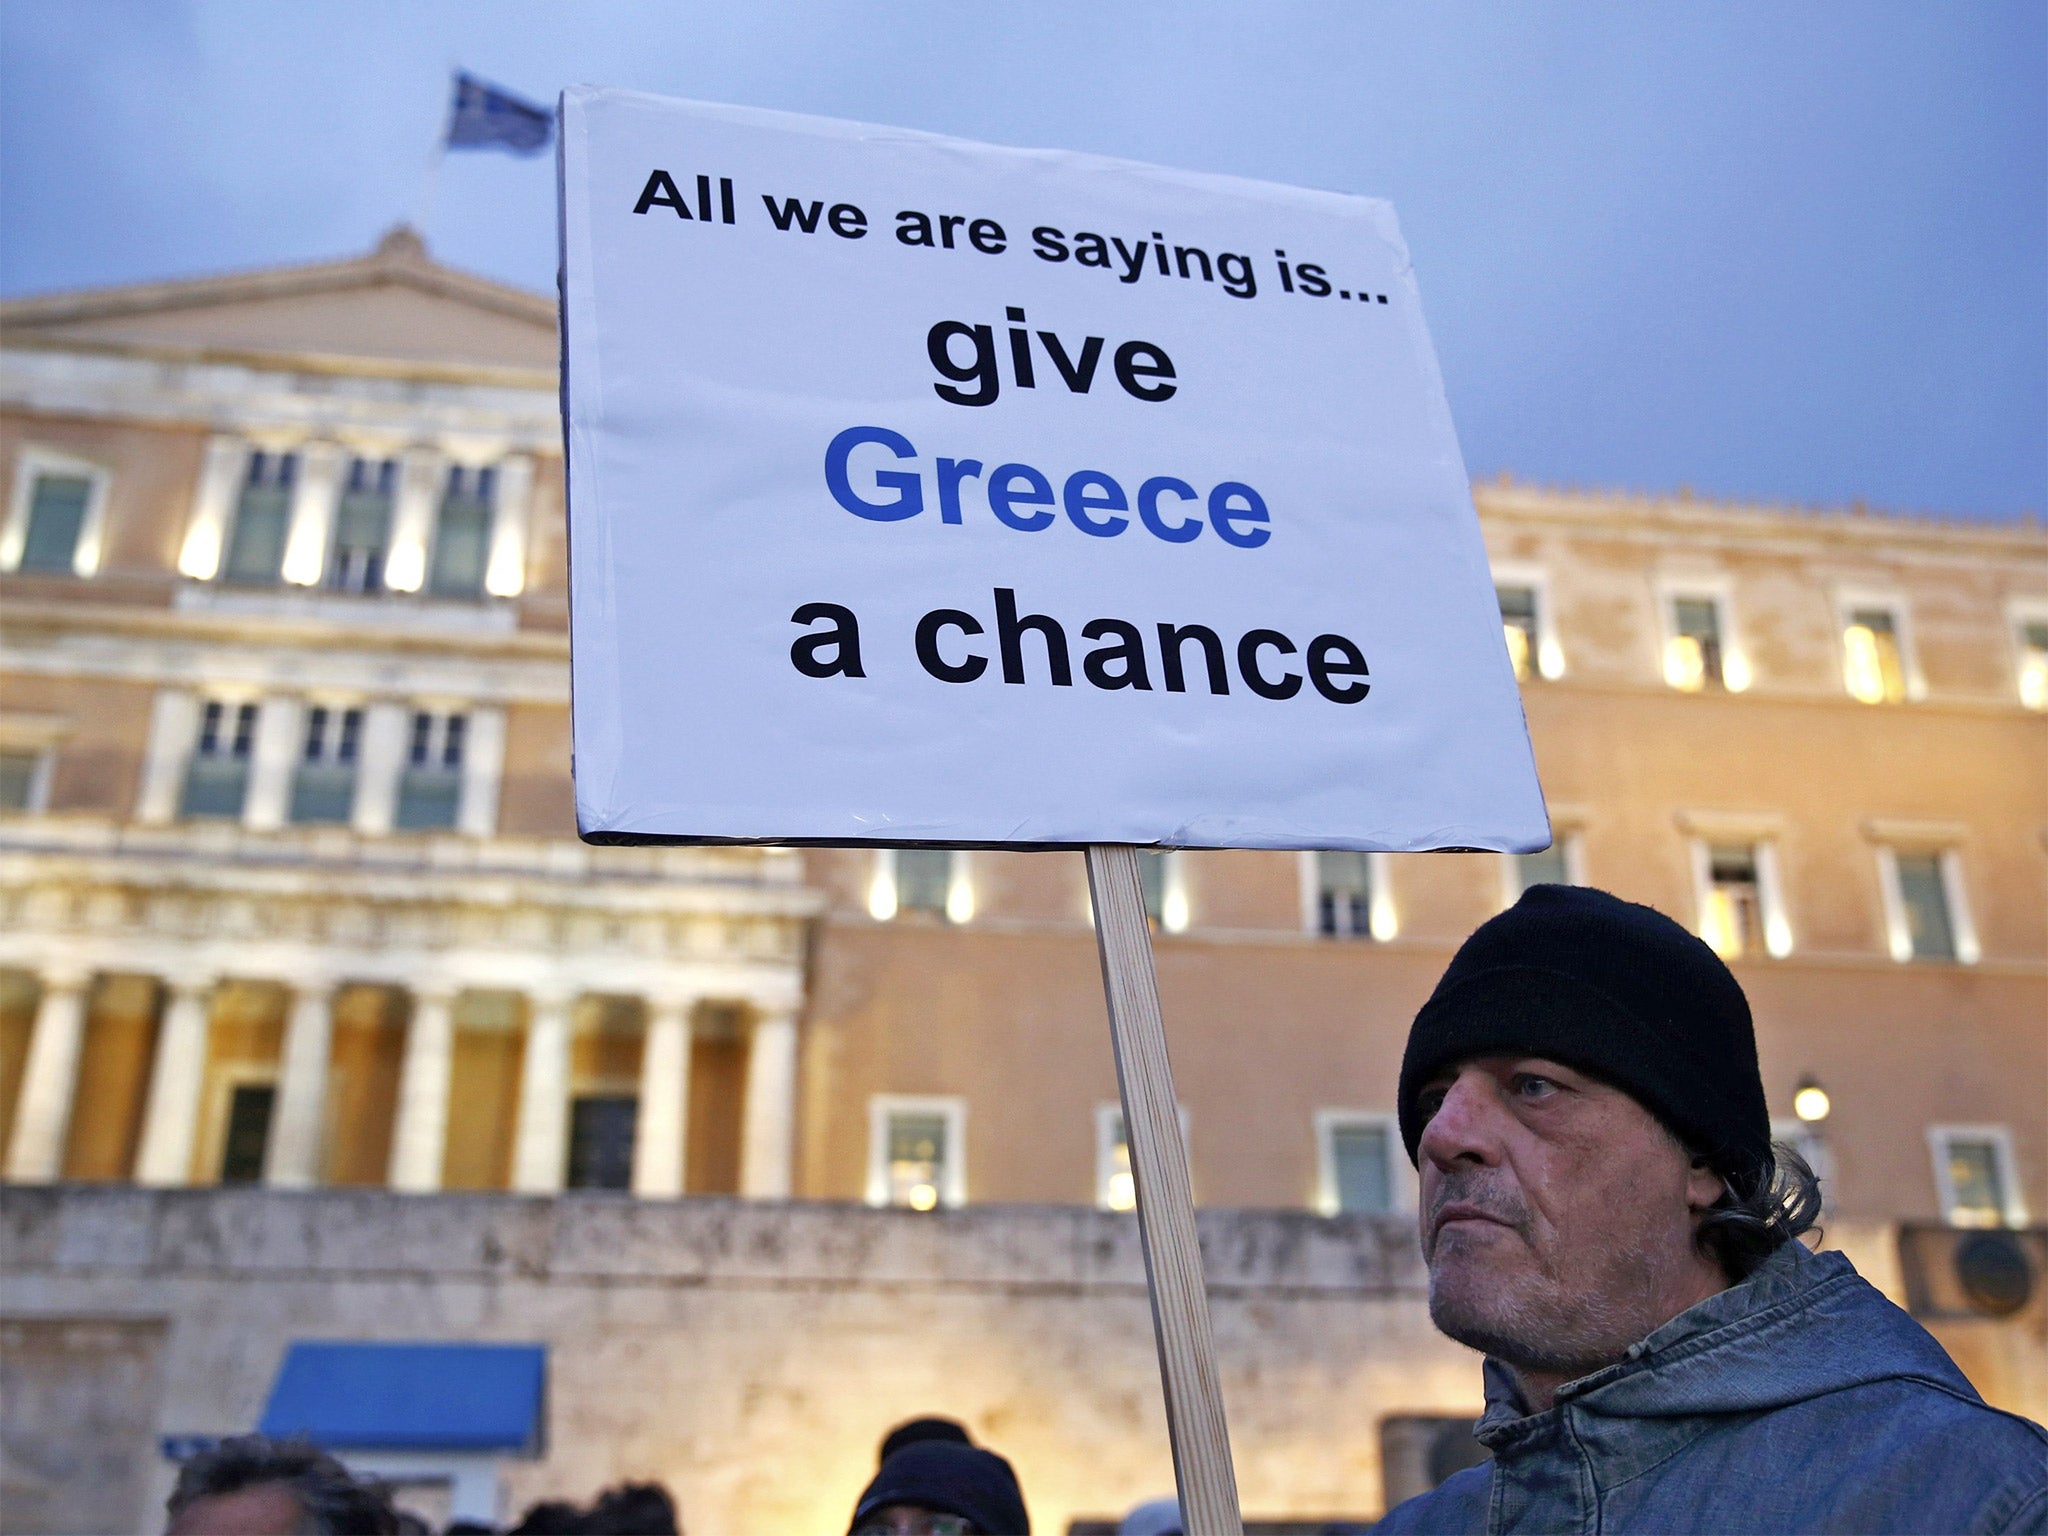 A protester displays his sign during an anti-austerity, pro-government demonstration outside the Greek parliament in Athens on Wednesday